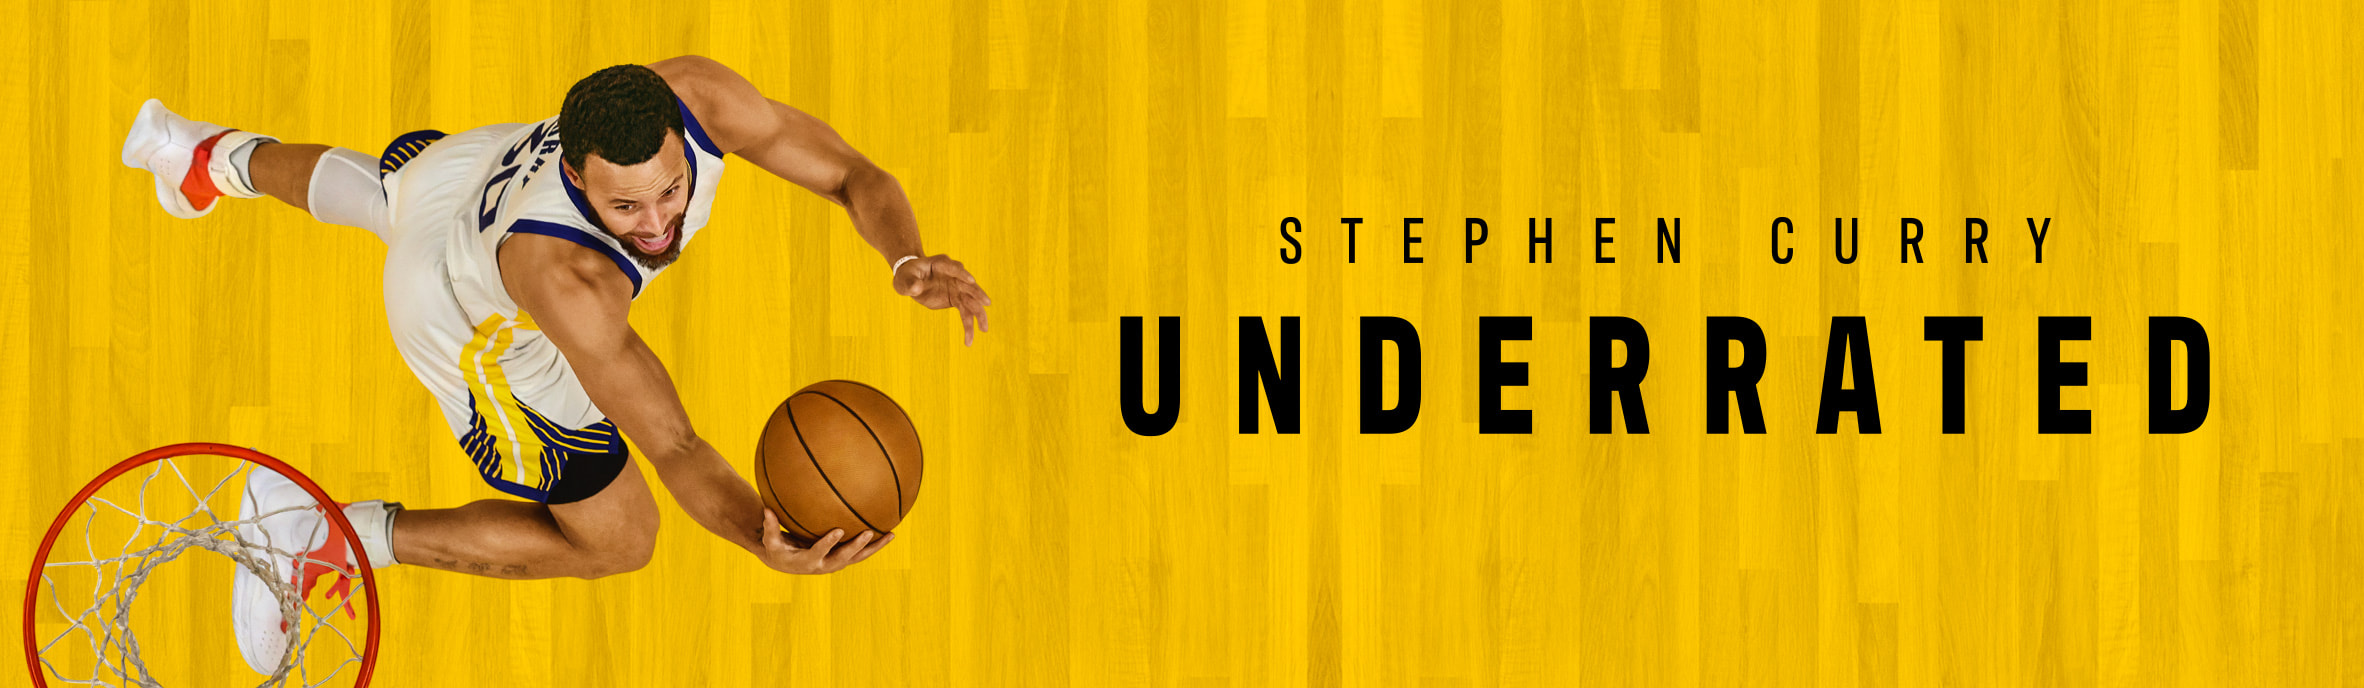 Stephen Curry: Underrated - Apple TV+ Press